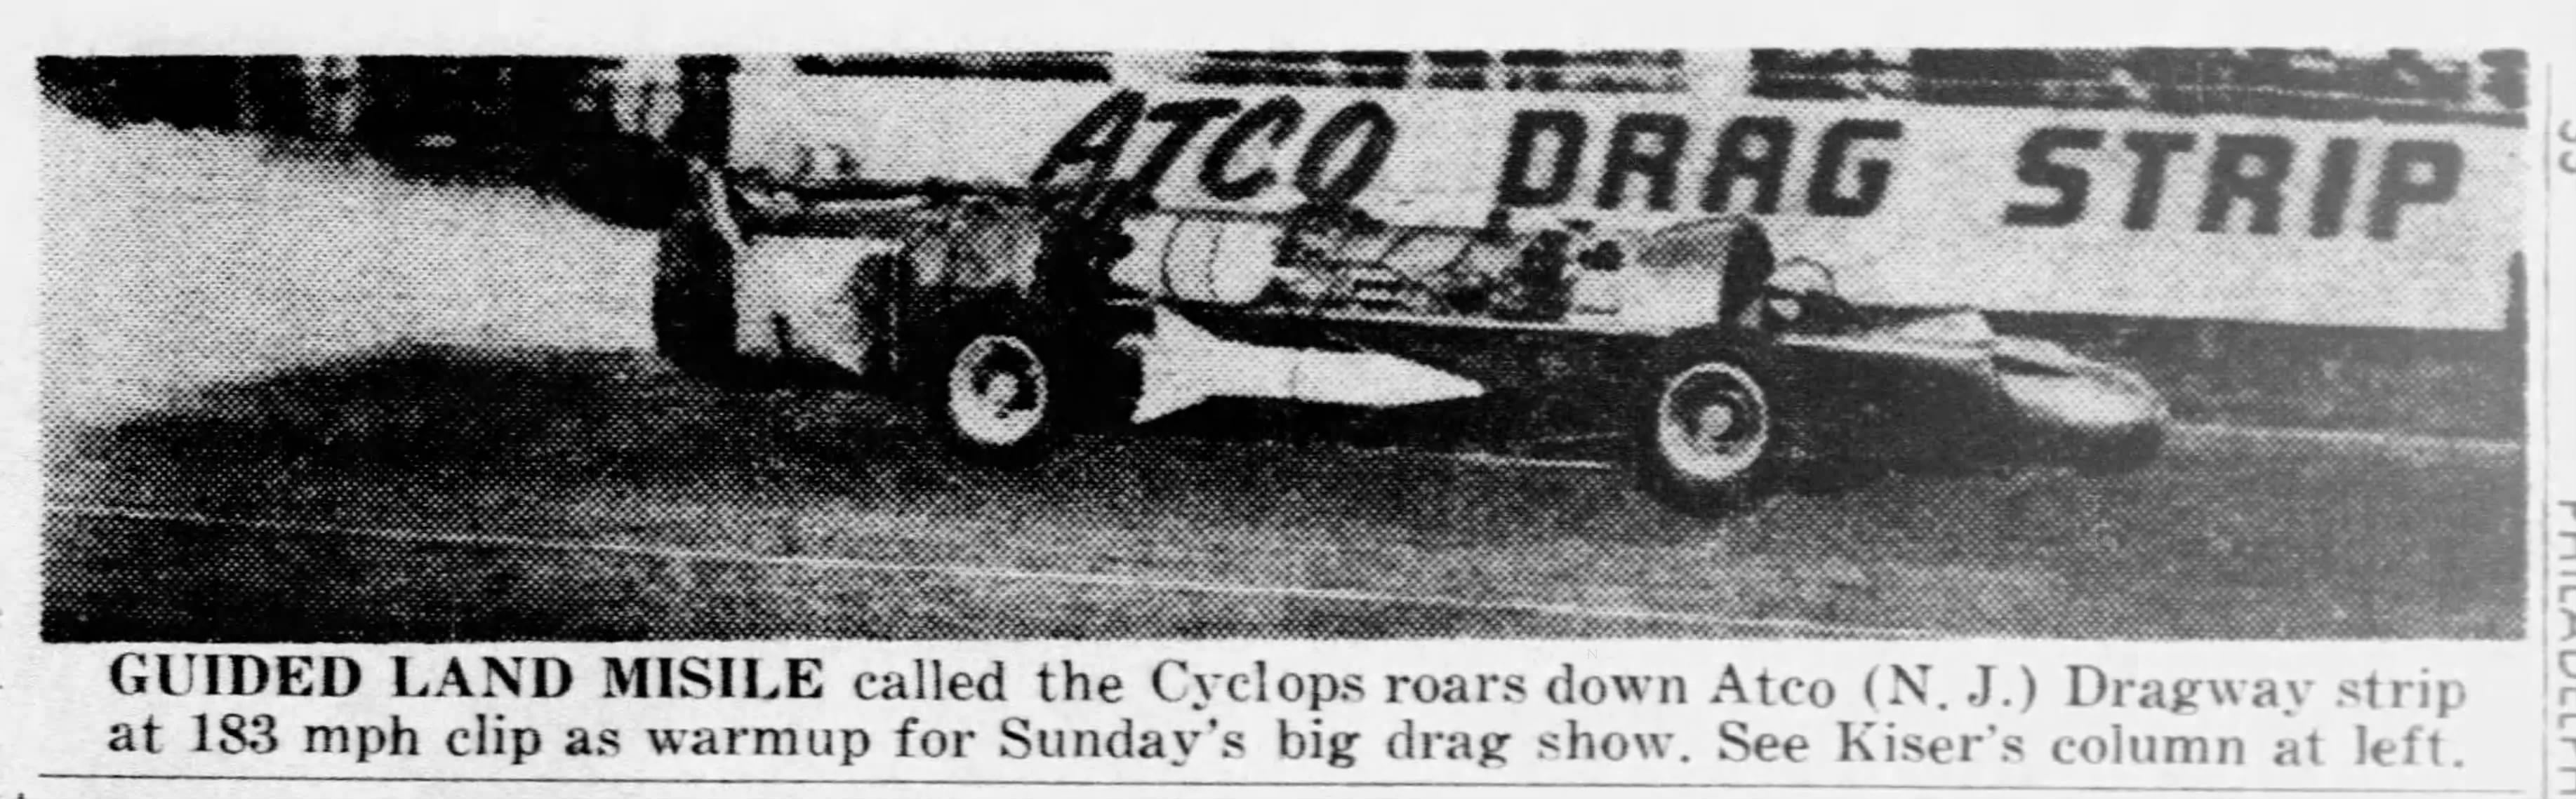 Art Arfons' Cyclops roars down the drag strip at Atco Dragway, as shown in this May 19, 1962, edition of the Daily News.